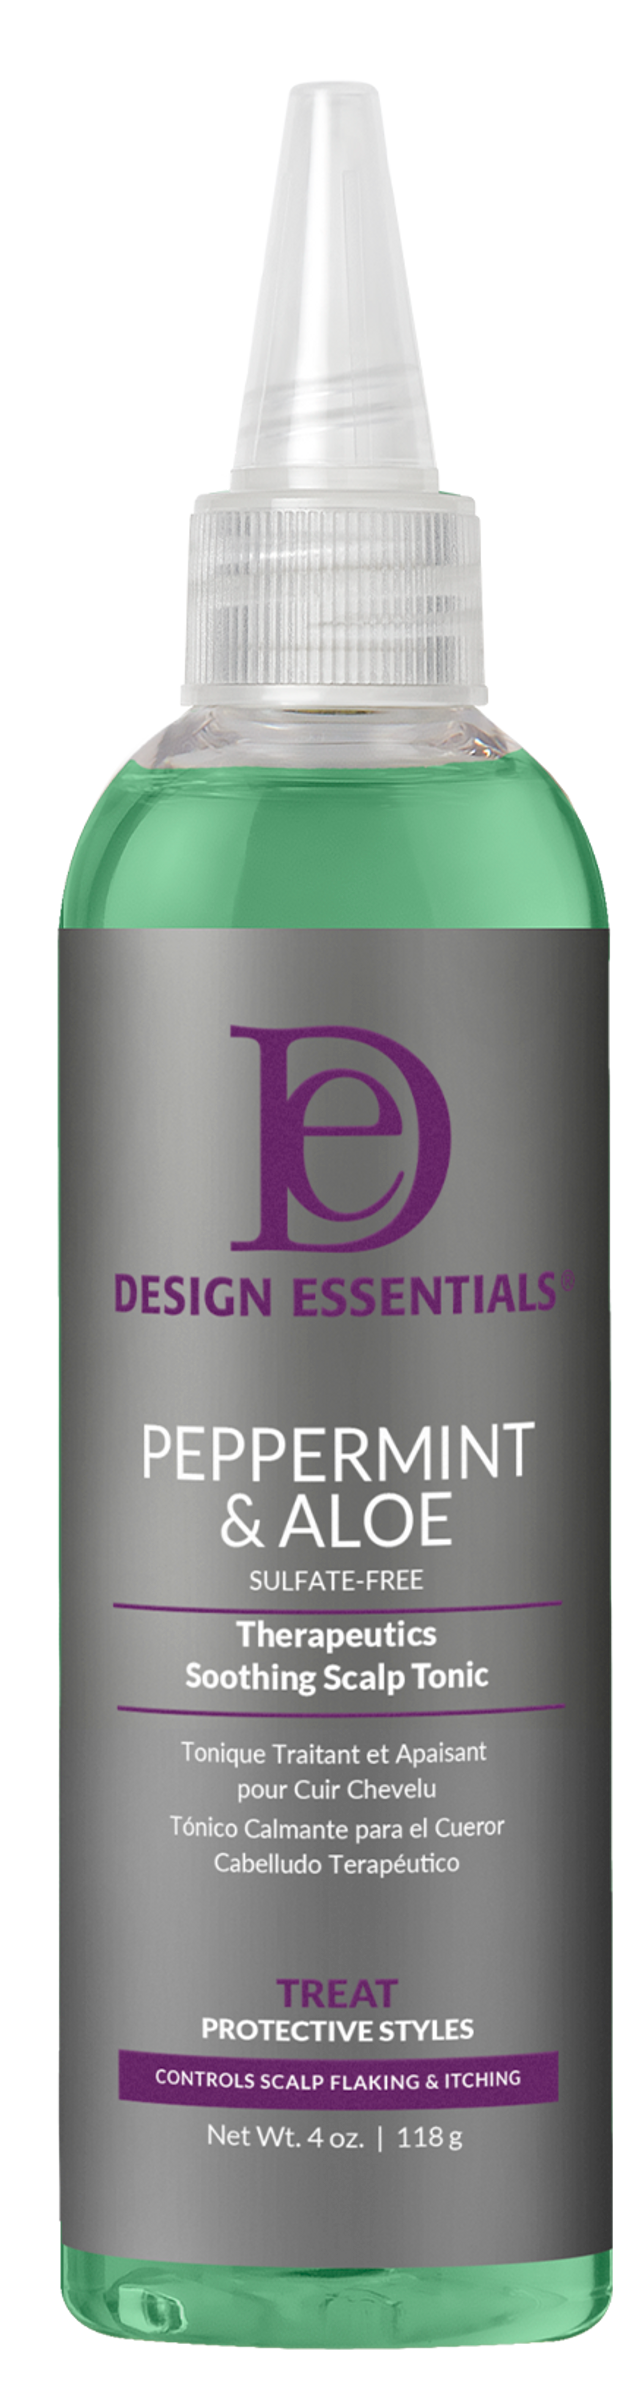 Design Essentials Peppermint & Aloe Soothing Scalp Tonic 4oz